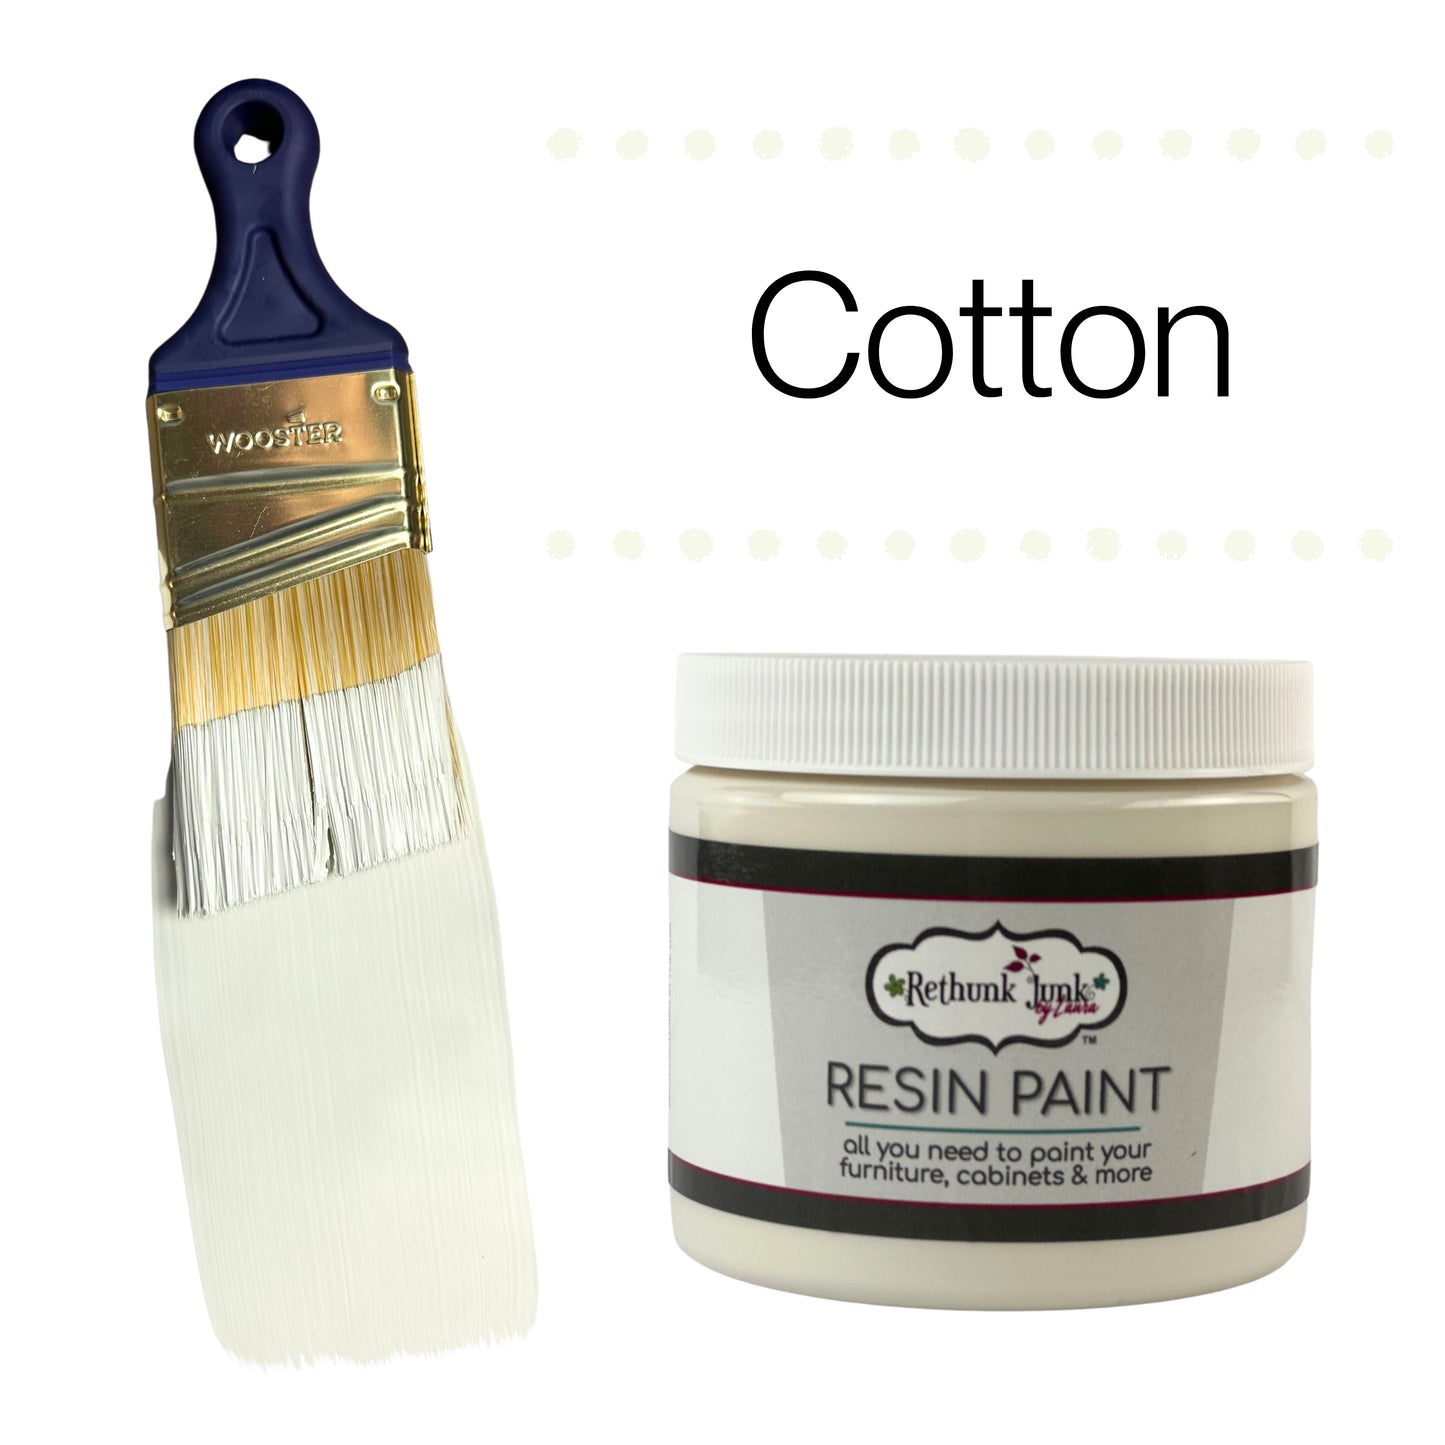 Rethunk Junk Resin Paint in Cotton